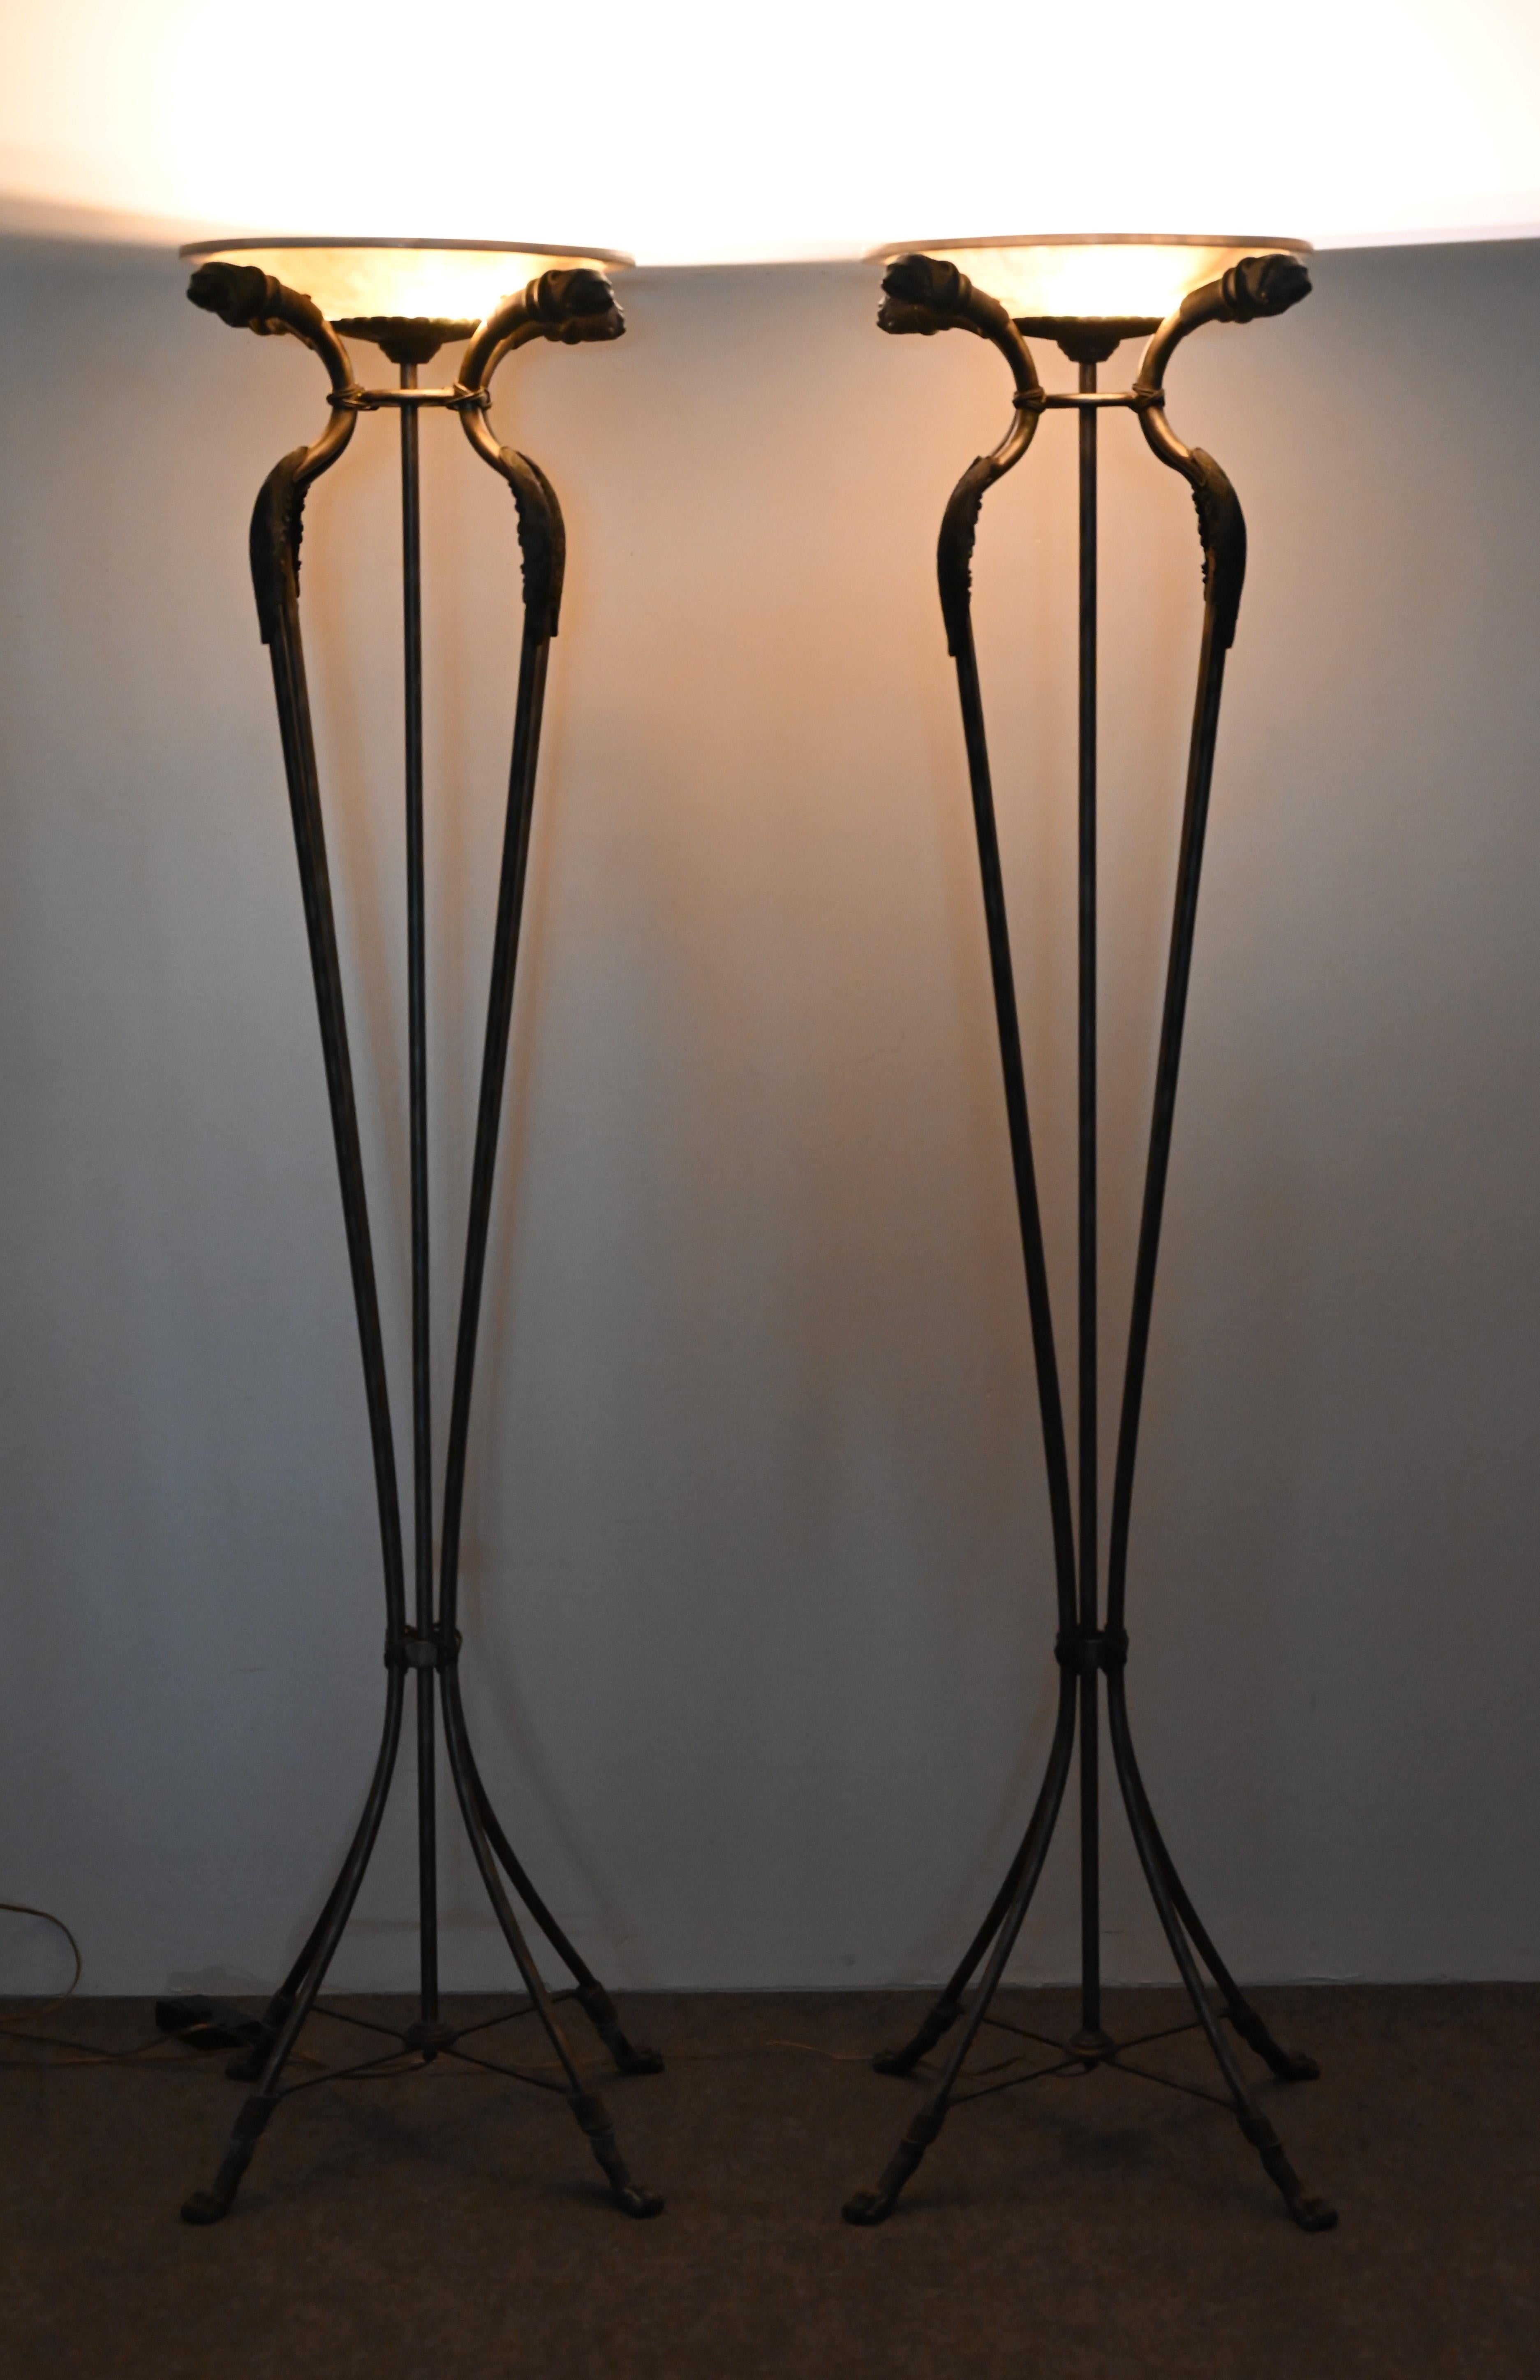 A wonderful pair of bronze over steel Torchieres with tesselated shades. The pair of lamps is attributed to Maitland Smith, however, they are unmarked. This lovely pair of floor lamps would work well with antiques and Neoclassical or Empire